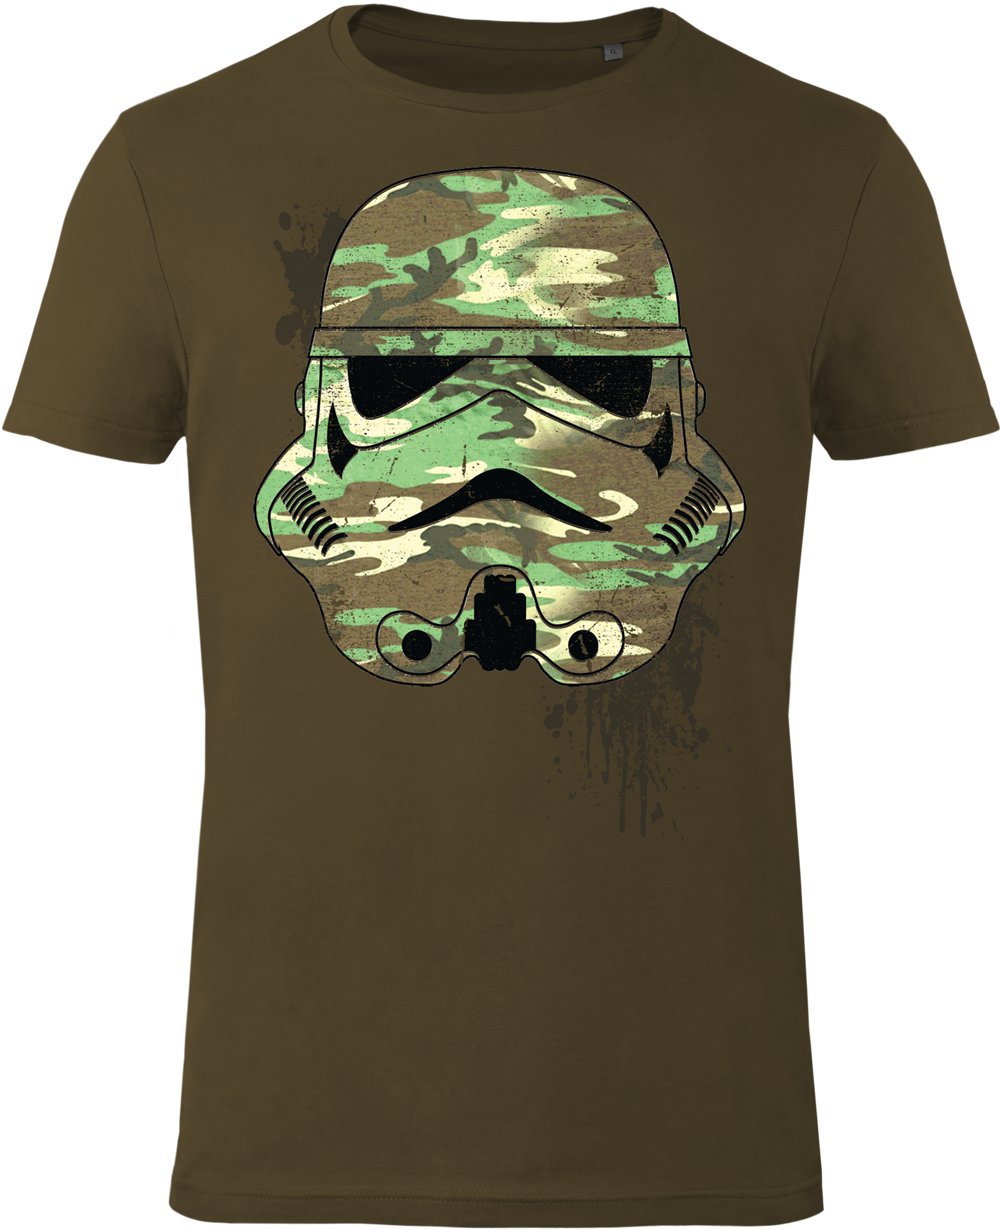 Imperial Stormtrooper - Military T-shirt画像